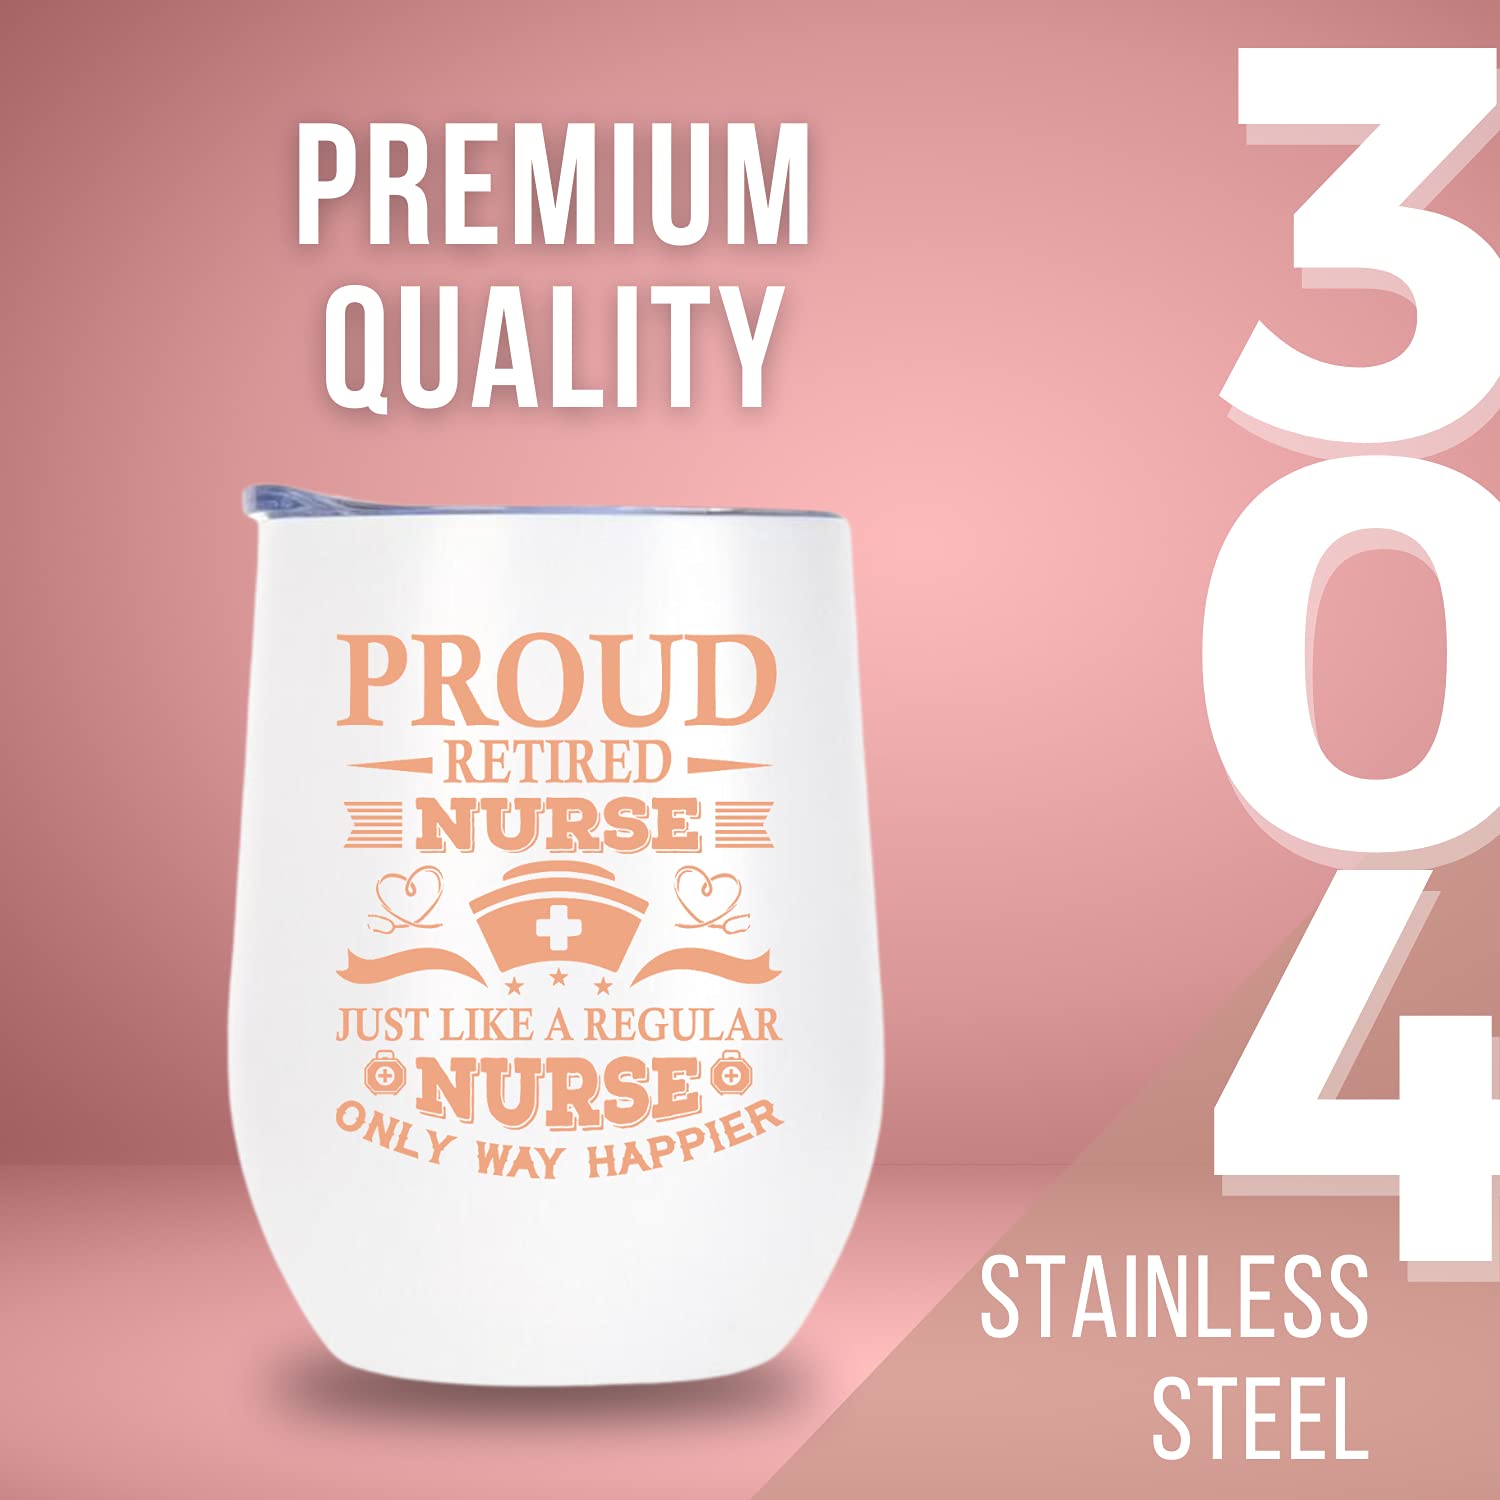 Onebttl Nurse Retirement Gifts for Women, Retirement Gifts for Women 2023, Insulated 12oz Stainless Steel Tumbler with Lid, Proud Retired Nurse Tumbler/Mug/Cup, Gift Box Included